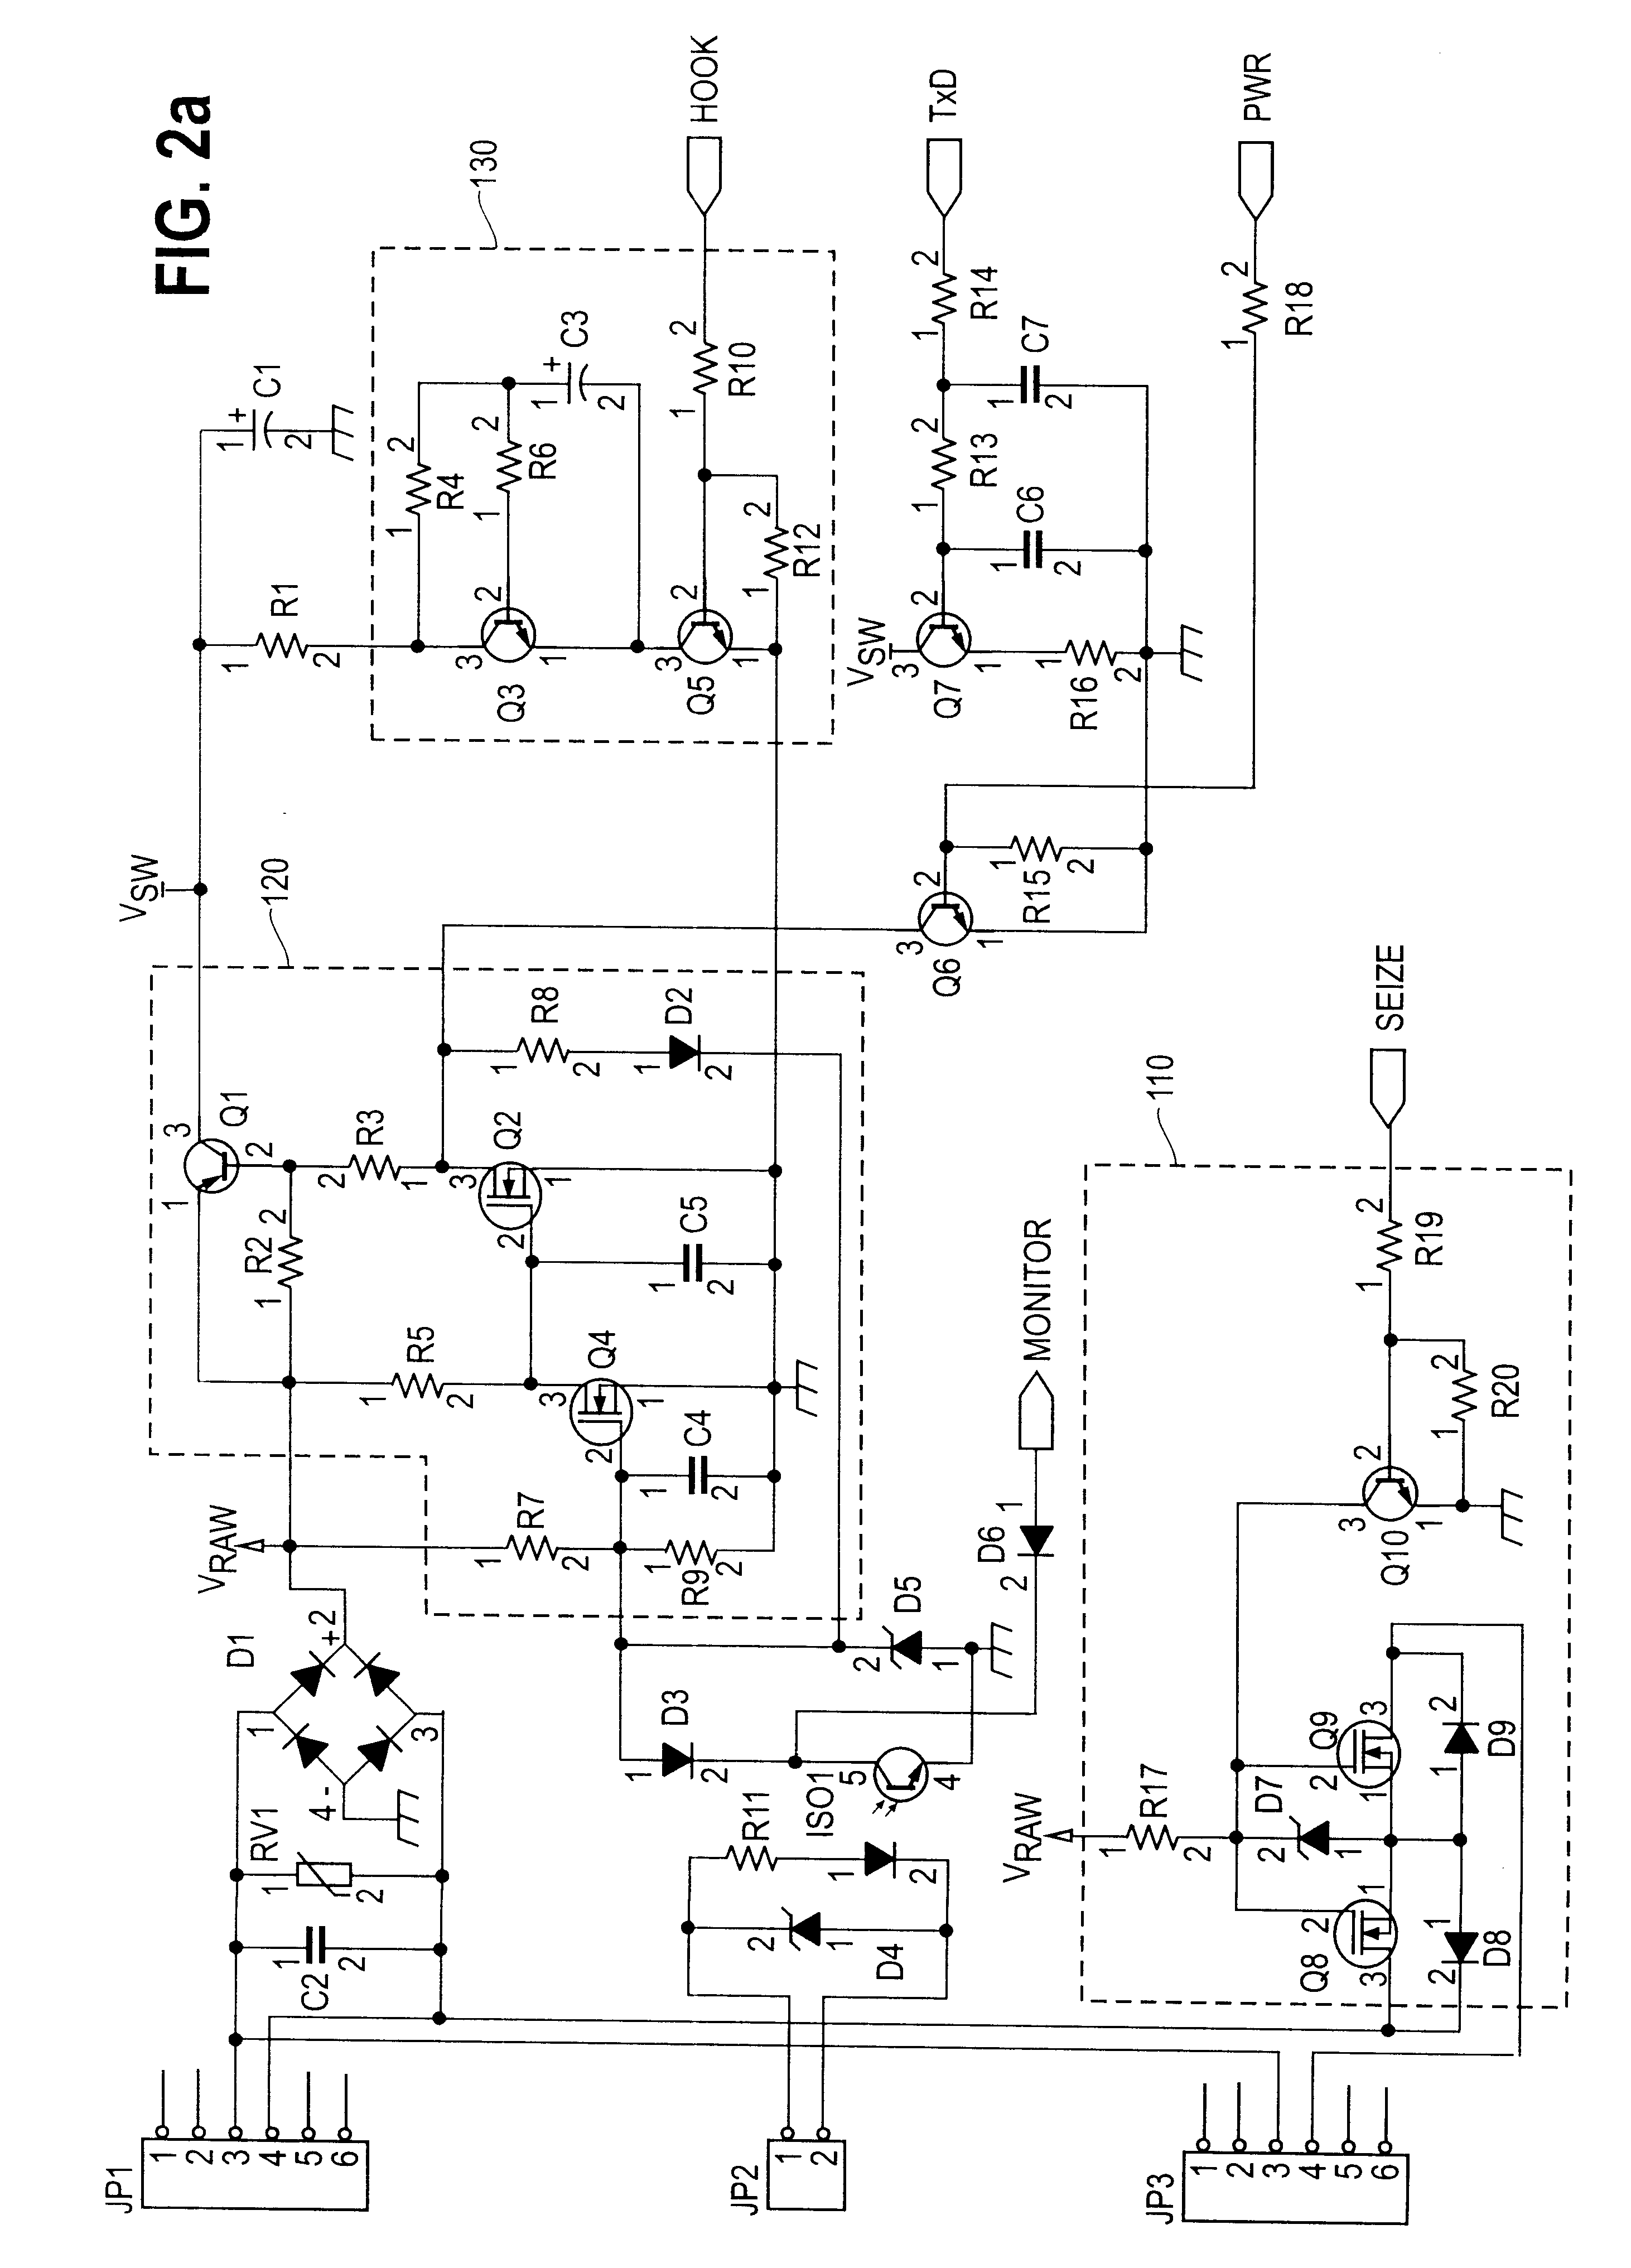 Telephone intercept apparatus and method for intercepting an outgoing telephone number